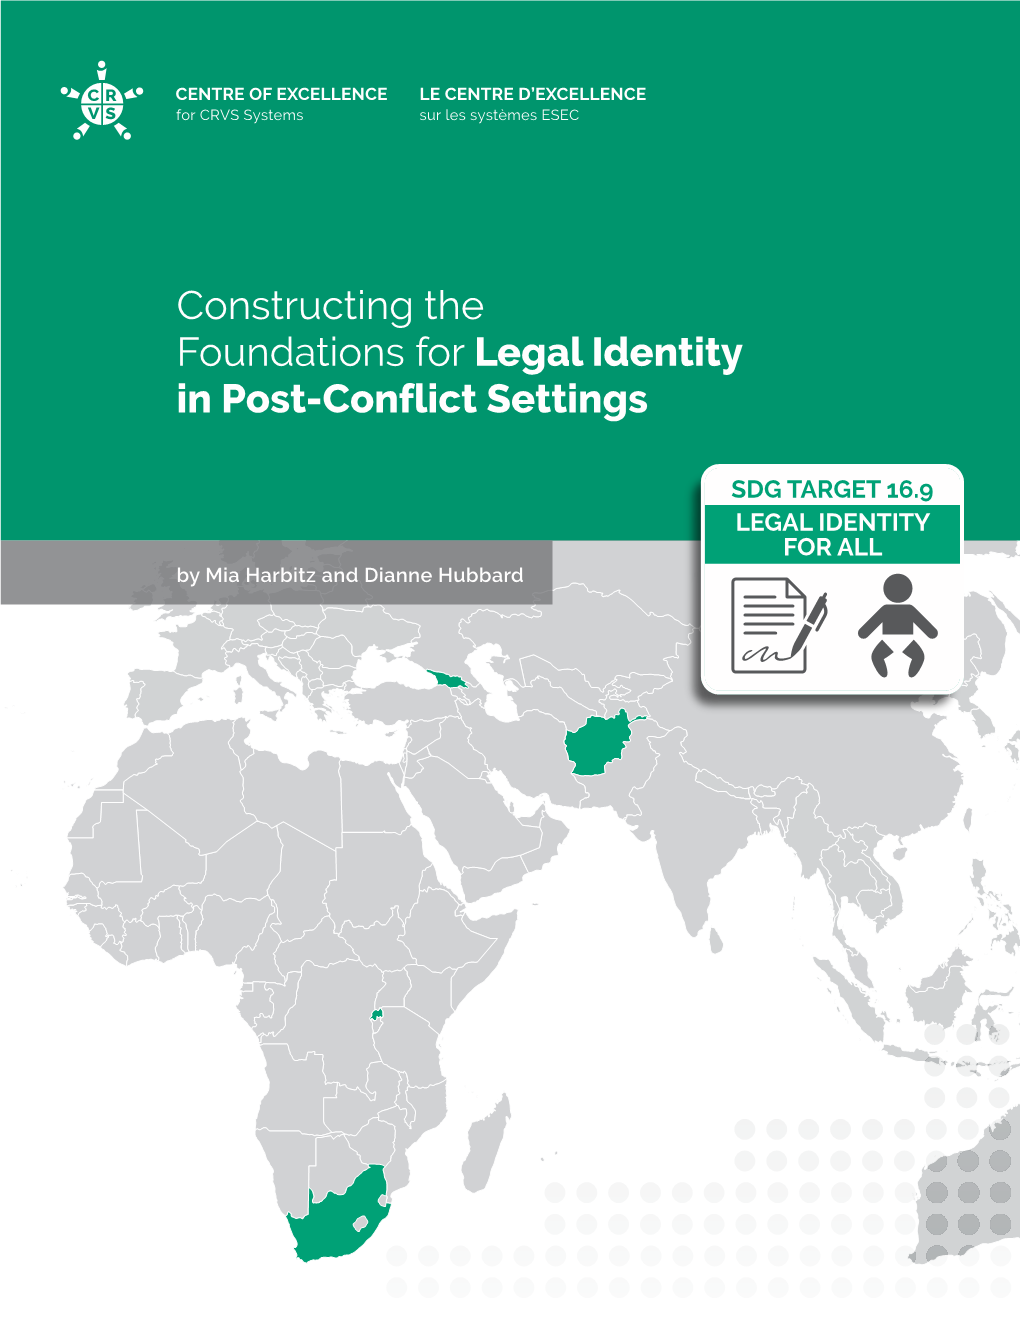 Constructing the Foundations for Legal Identity in Post-Conflict Settings